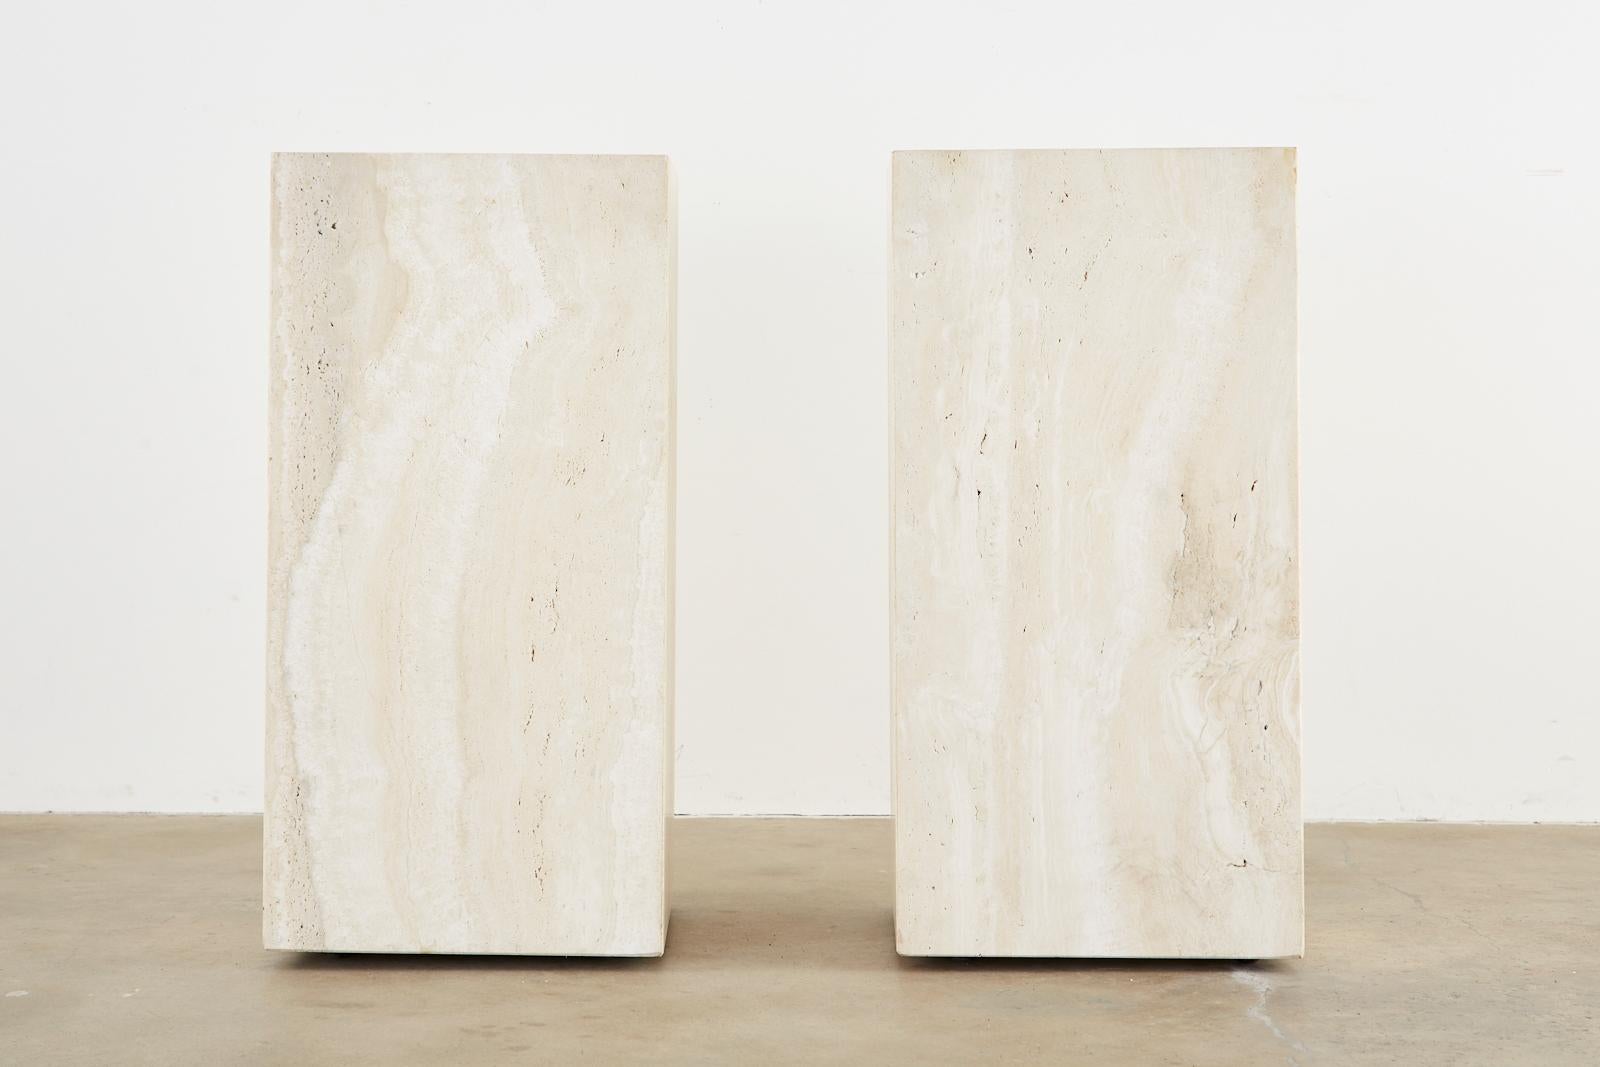 Modern pair of matching Italian pedestal display tables or presentation pedestals made from thick nearly 1 inch slabs of travertine. Featuring an inset frosted glass top with a mount for a light source underneath. Excellent joinery and craftsmanship